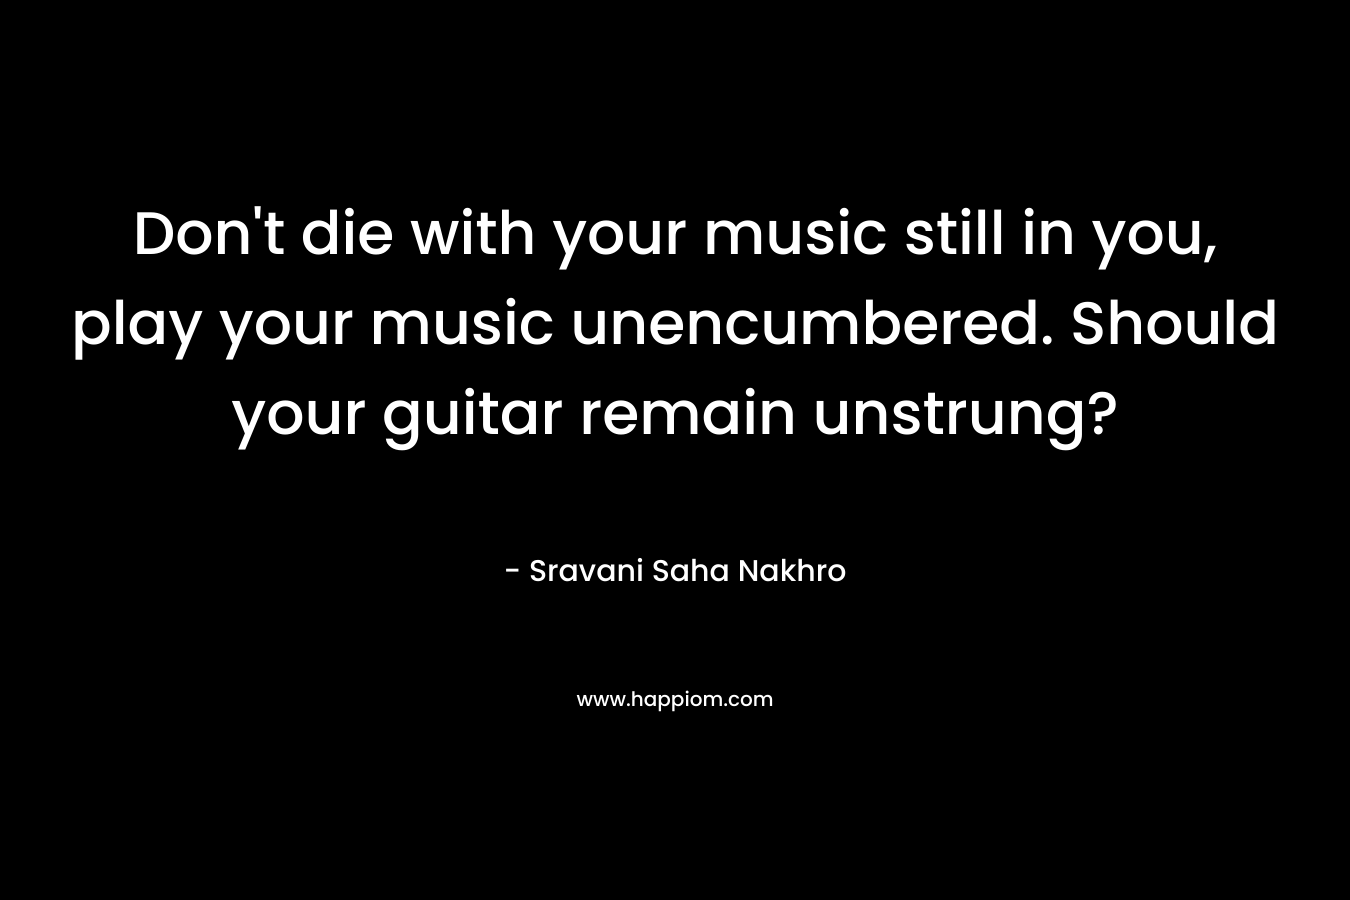 Don't die with your music still in you, play your music unencumbered. Should your guitar remain unstrung?